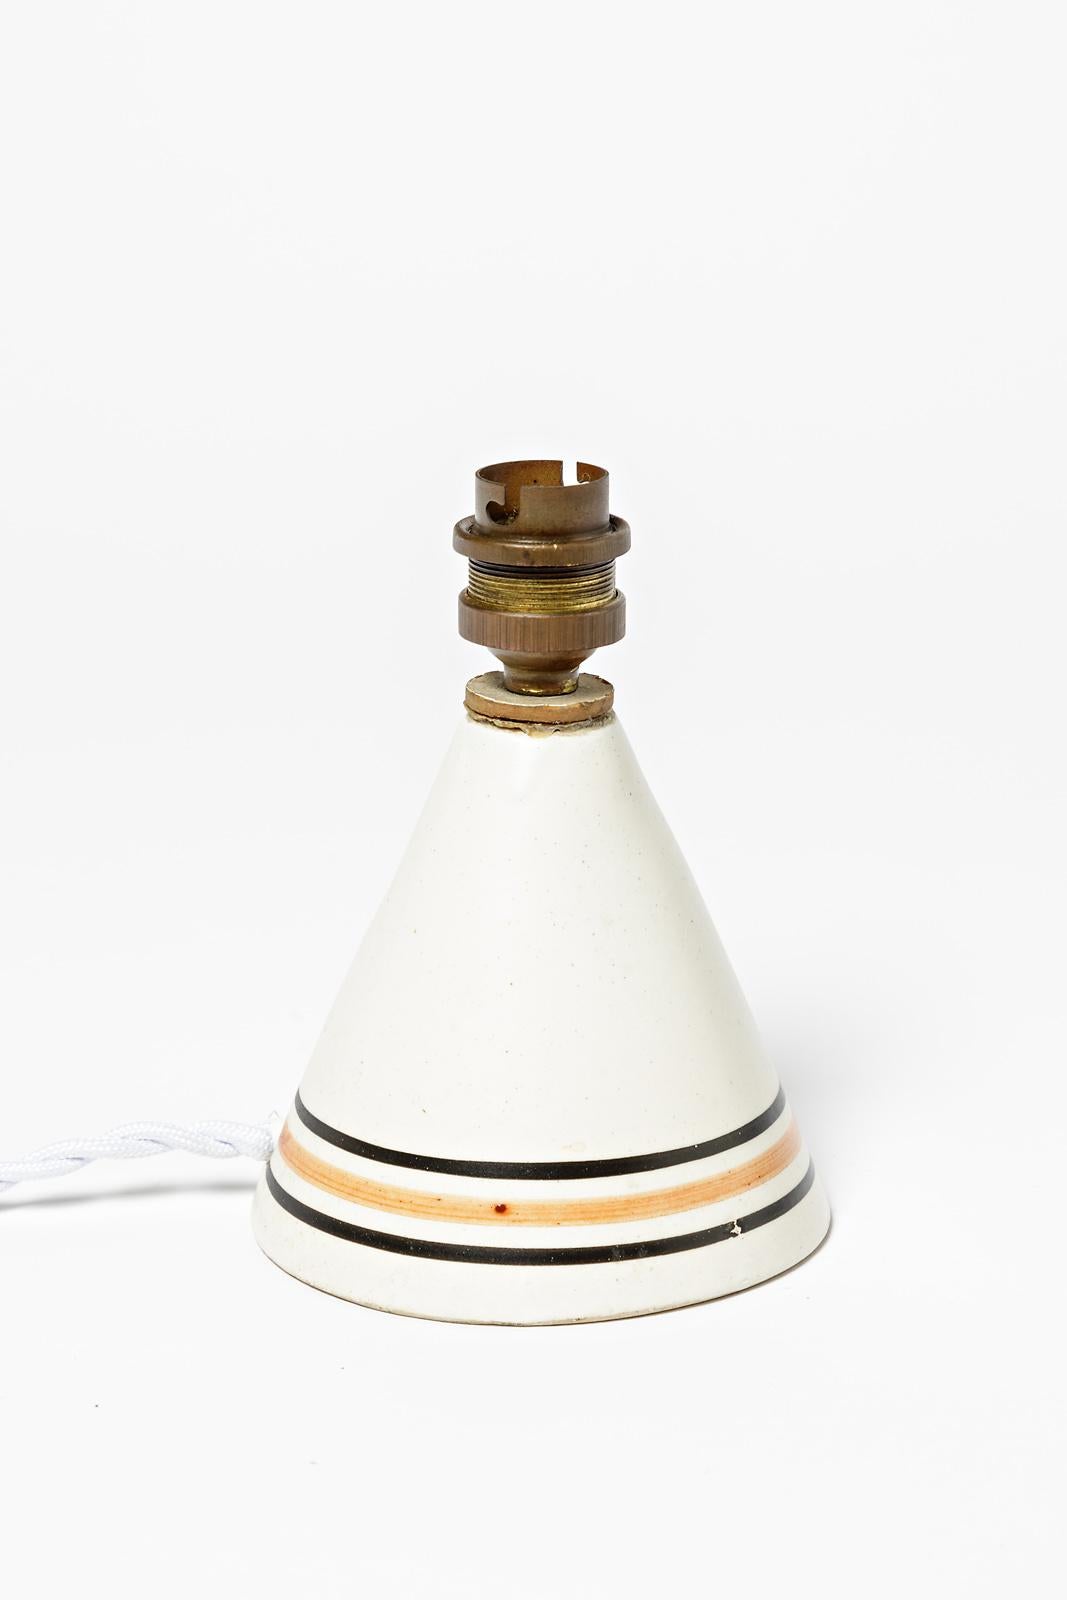 Roger Capron

Original ceramic table lamp with white ceramic glaze color and Minimalist decoration

Original perfect condition

Electrical system is ok

Signed under the base CAPRON VALLAURIS

Ceramic dimensions: Height 11cm, large